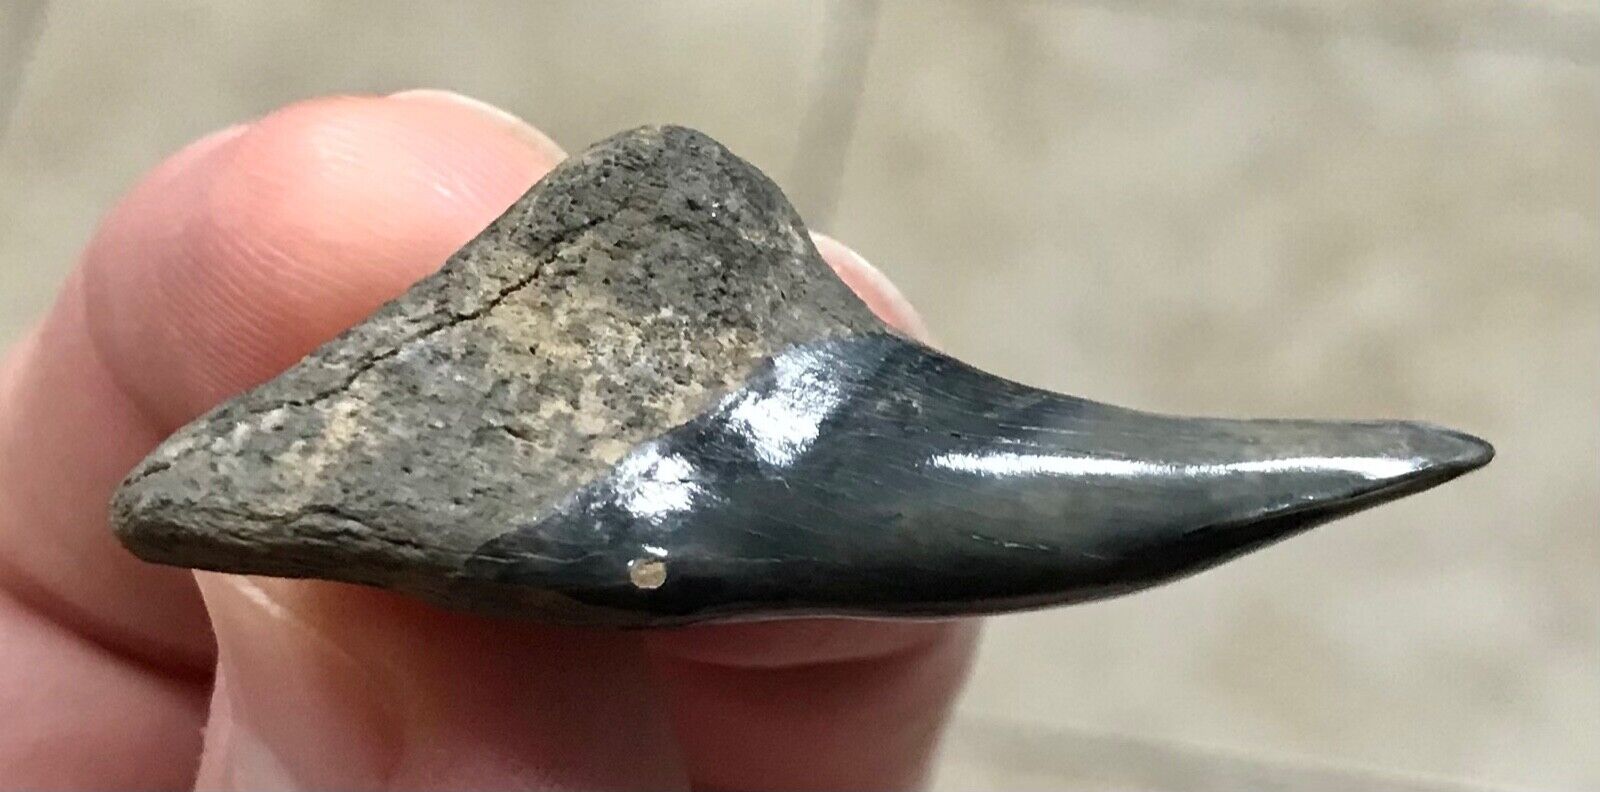 RECORD SIZED LOWER -GOLDEN BEACH- 1.88” x 0.88” Hemipristis Shark Tooth Fossil